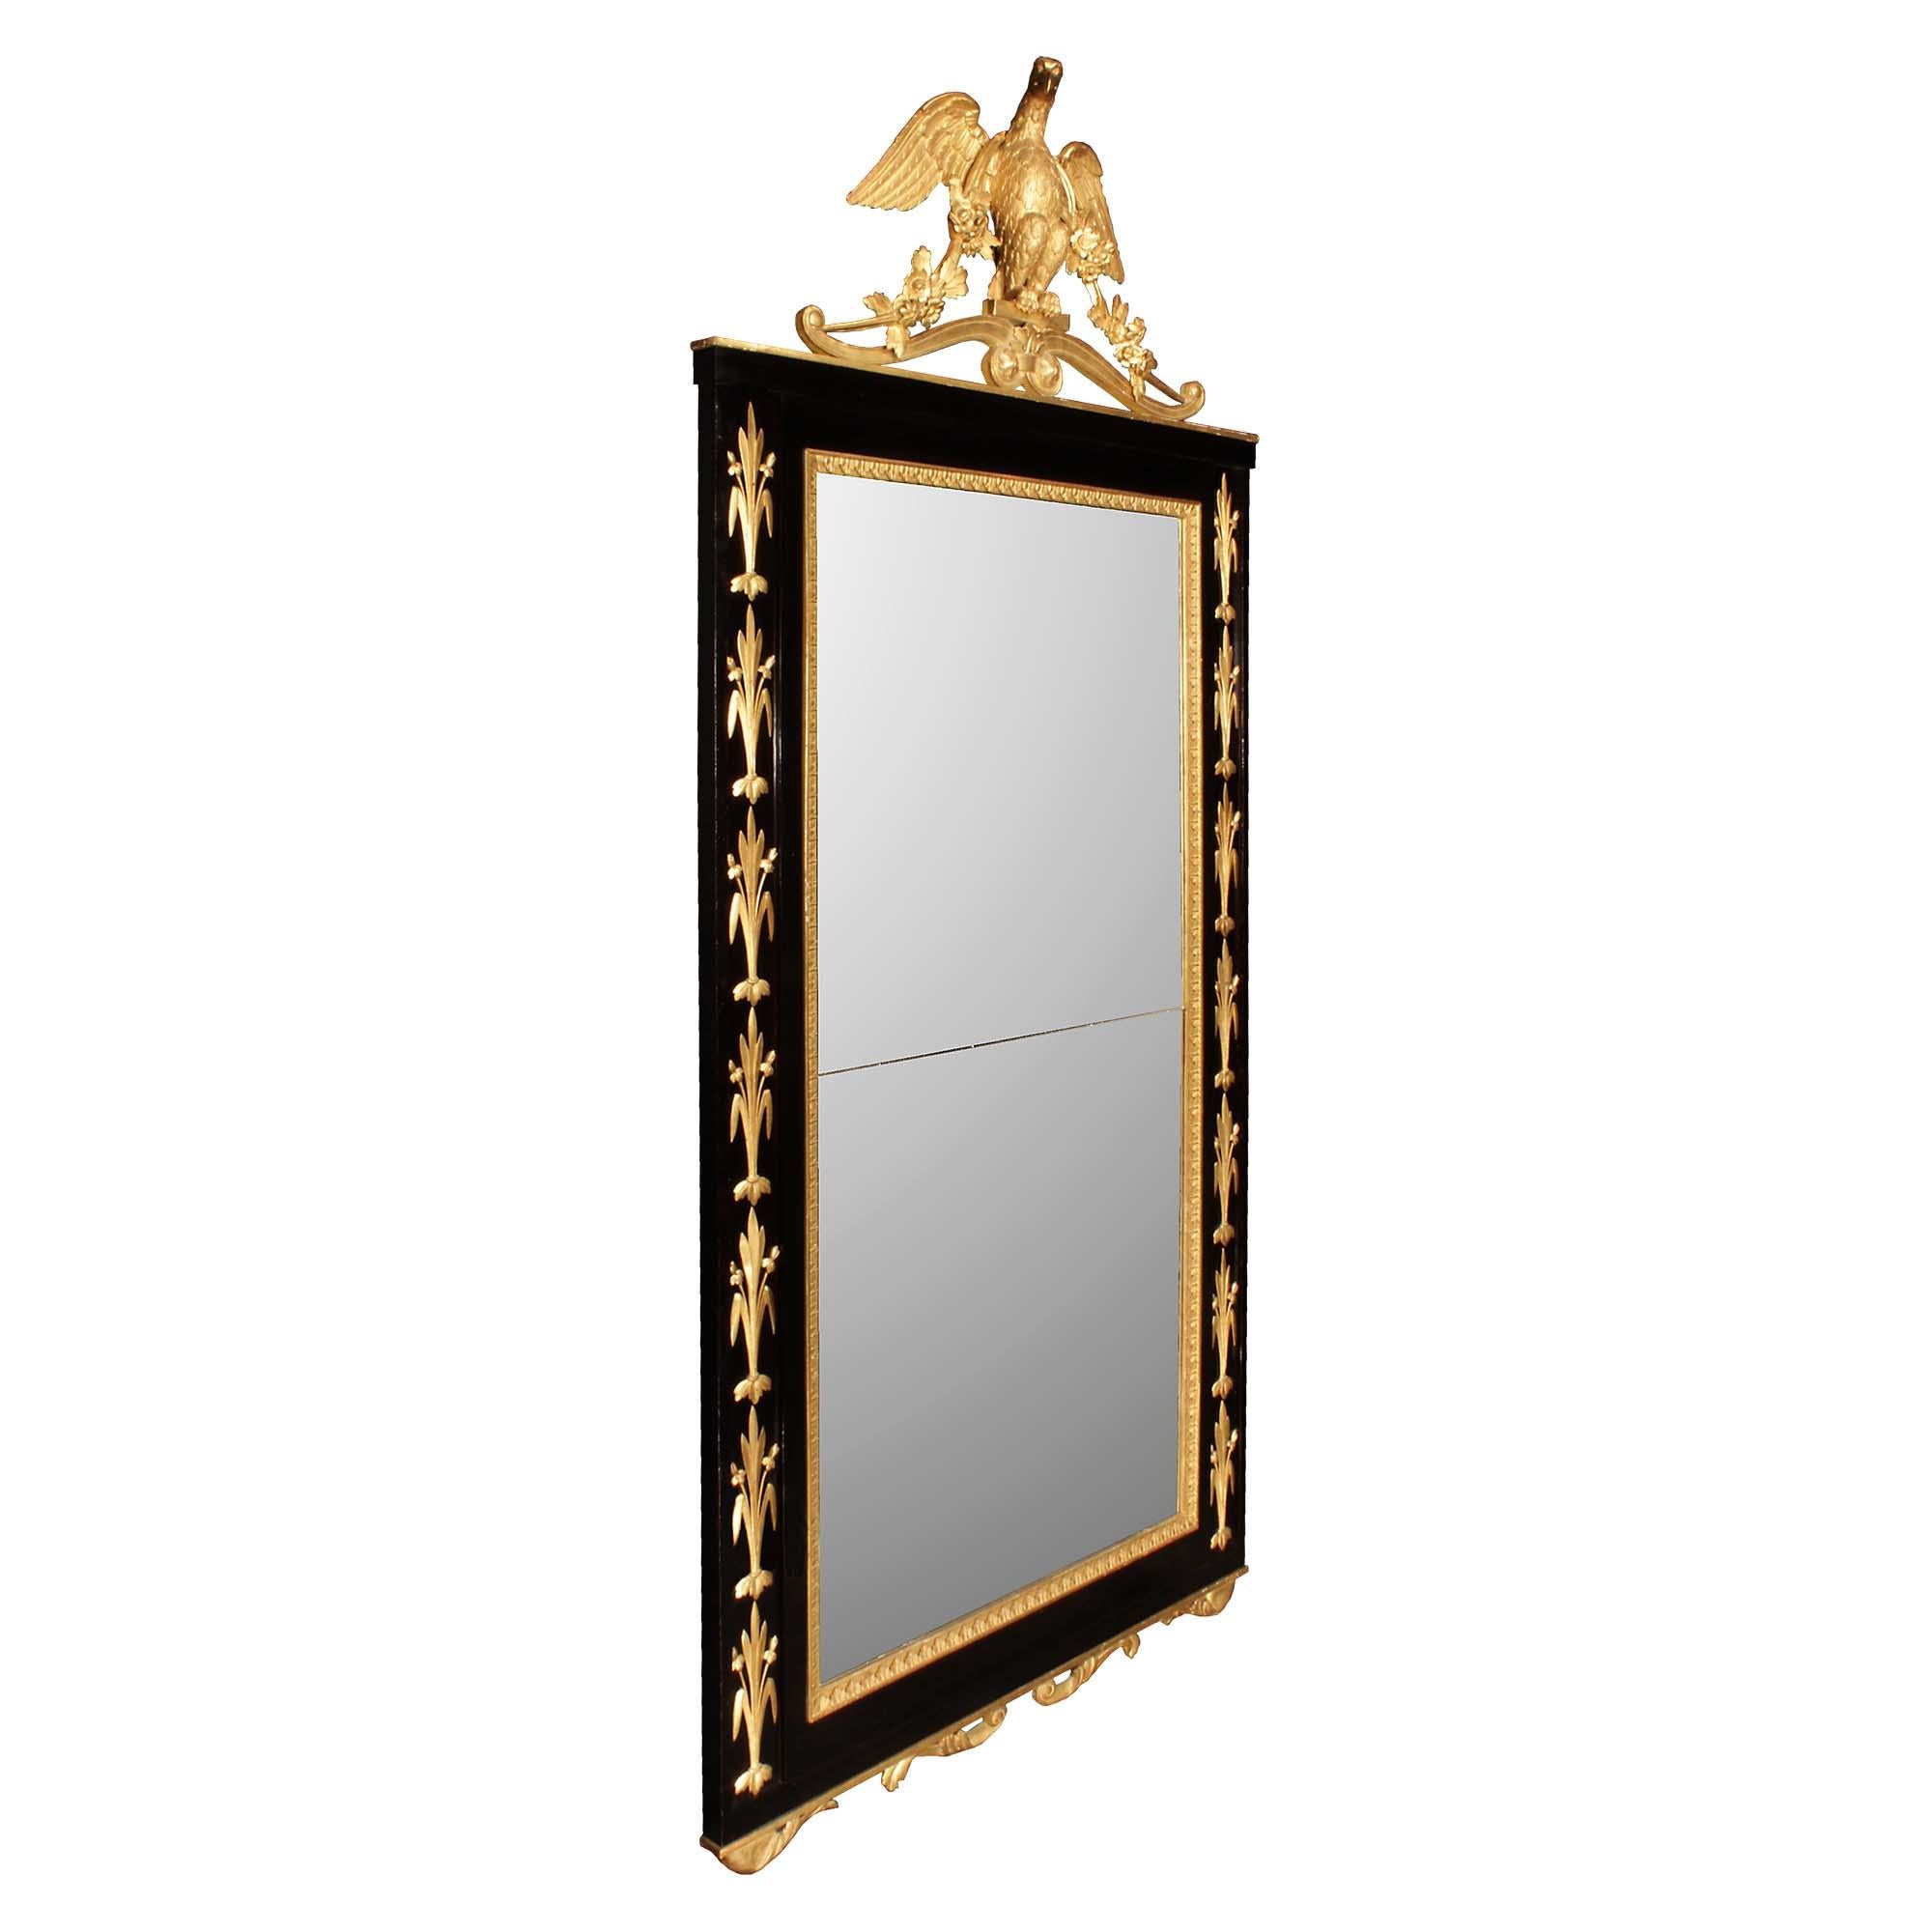 A stunning Italian early 19th century Neo-Classical st. ebony and giltwood mirror. The original mirror plate is within an ebony frame within a floral carved giltwood border, and a recessed panel at each side displaying richly carved giltwood